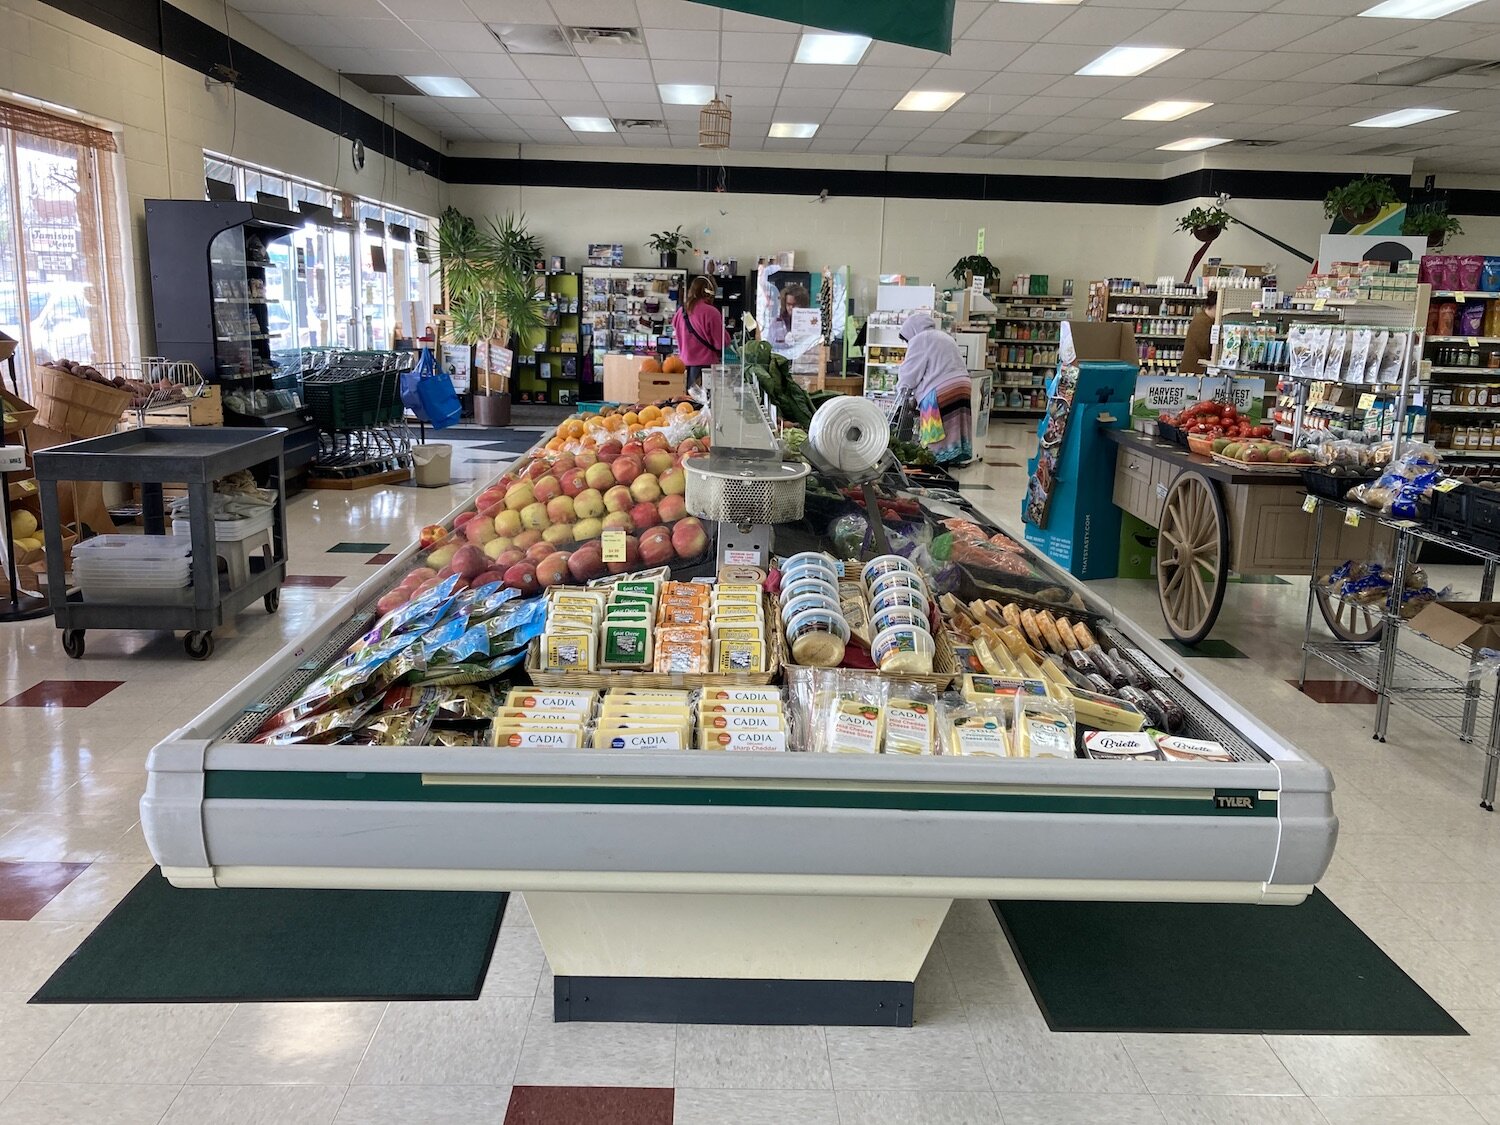 The Health Food Shoppe is located at 3515 N. Anthony Blvd.